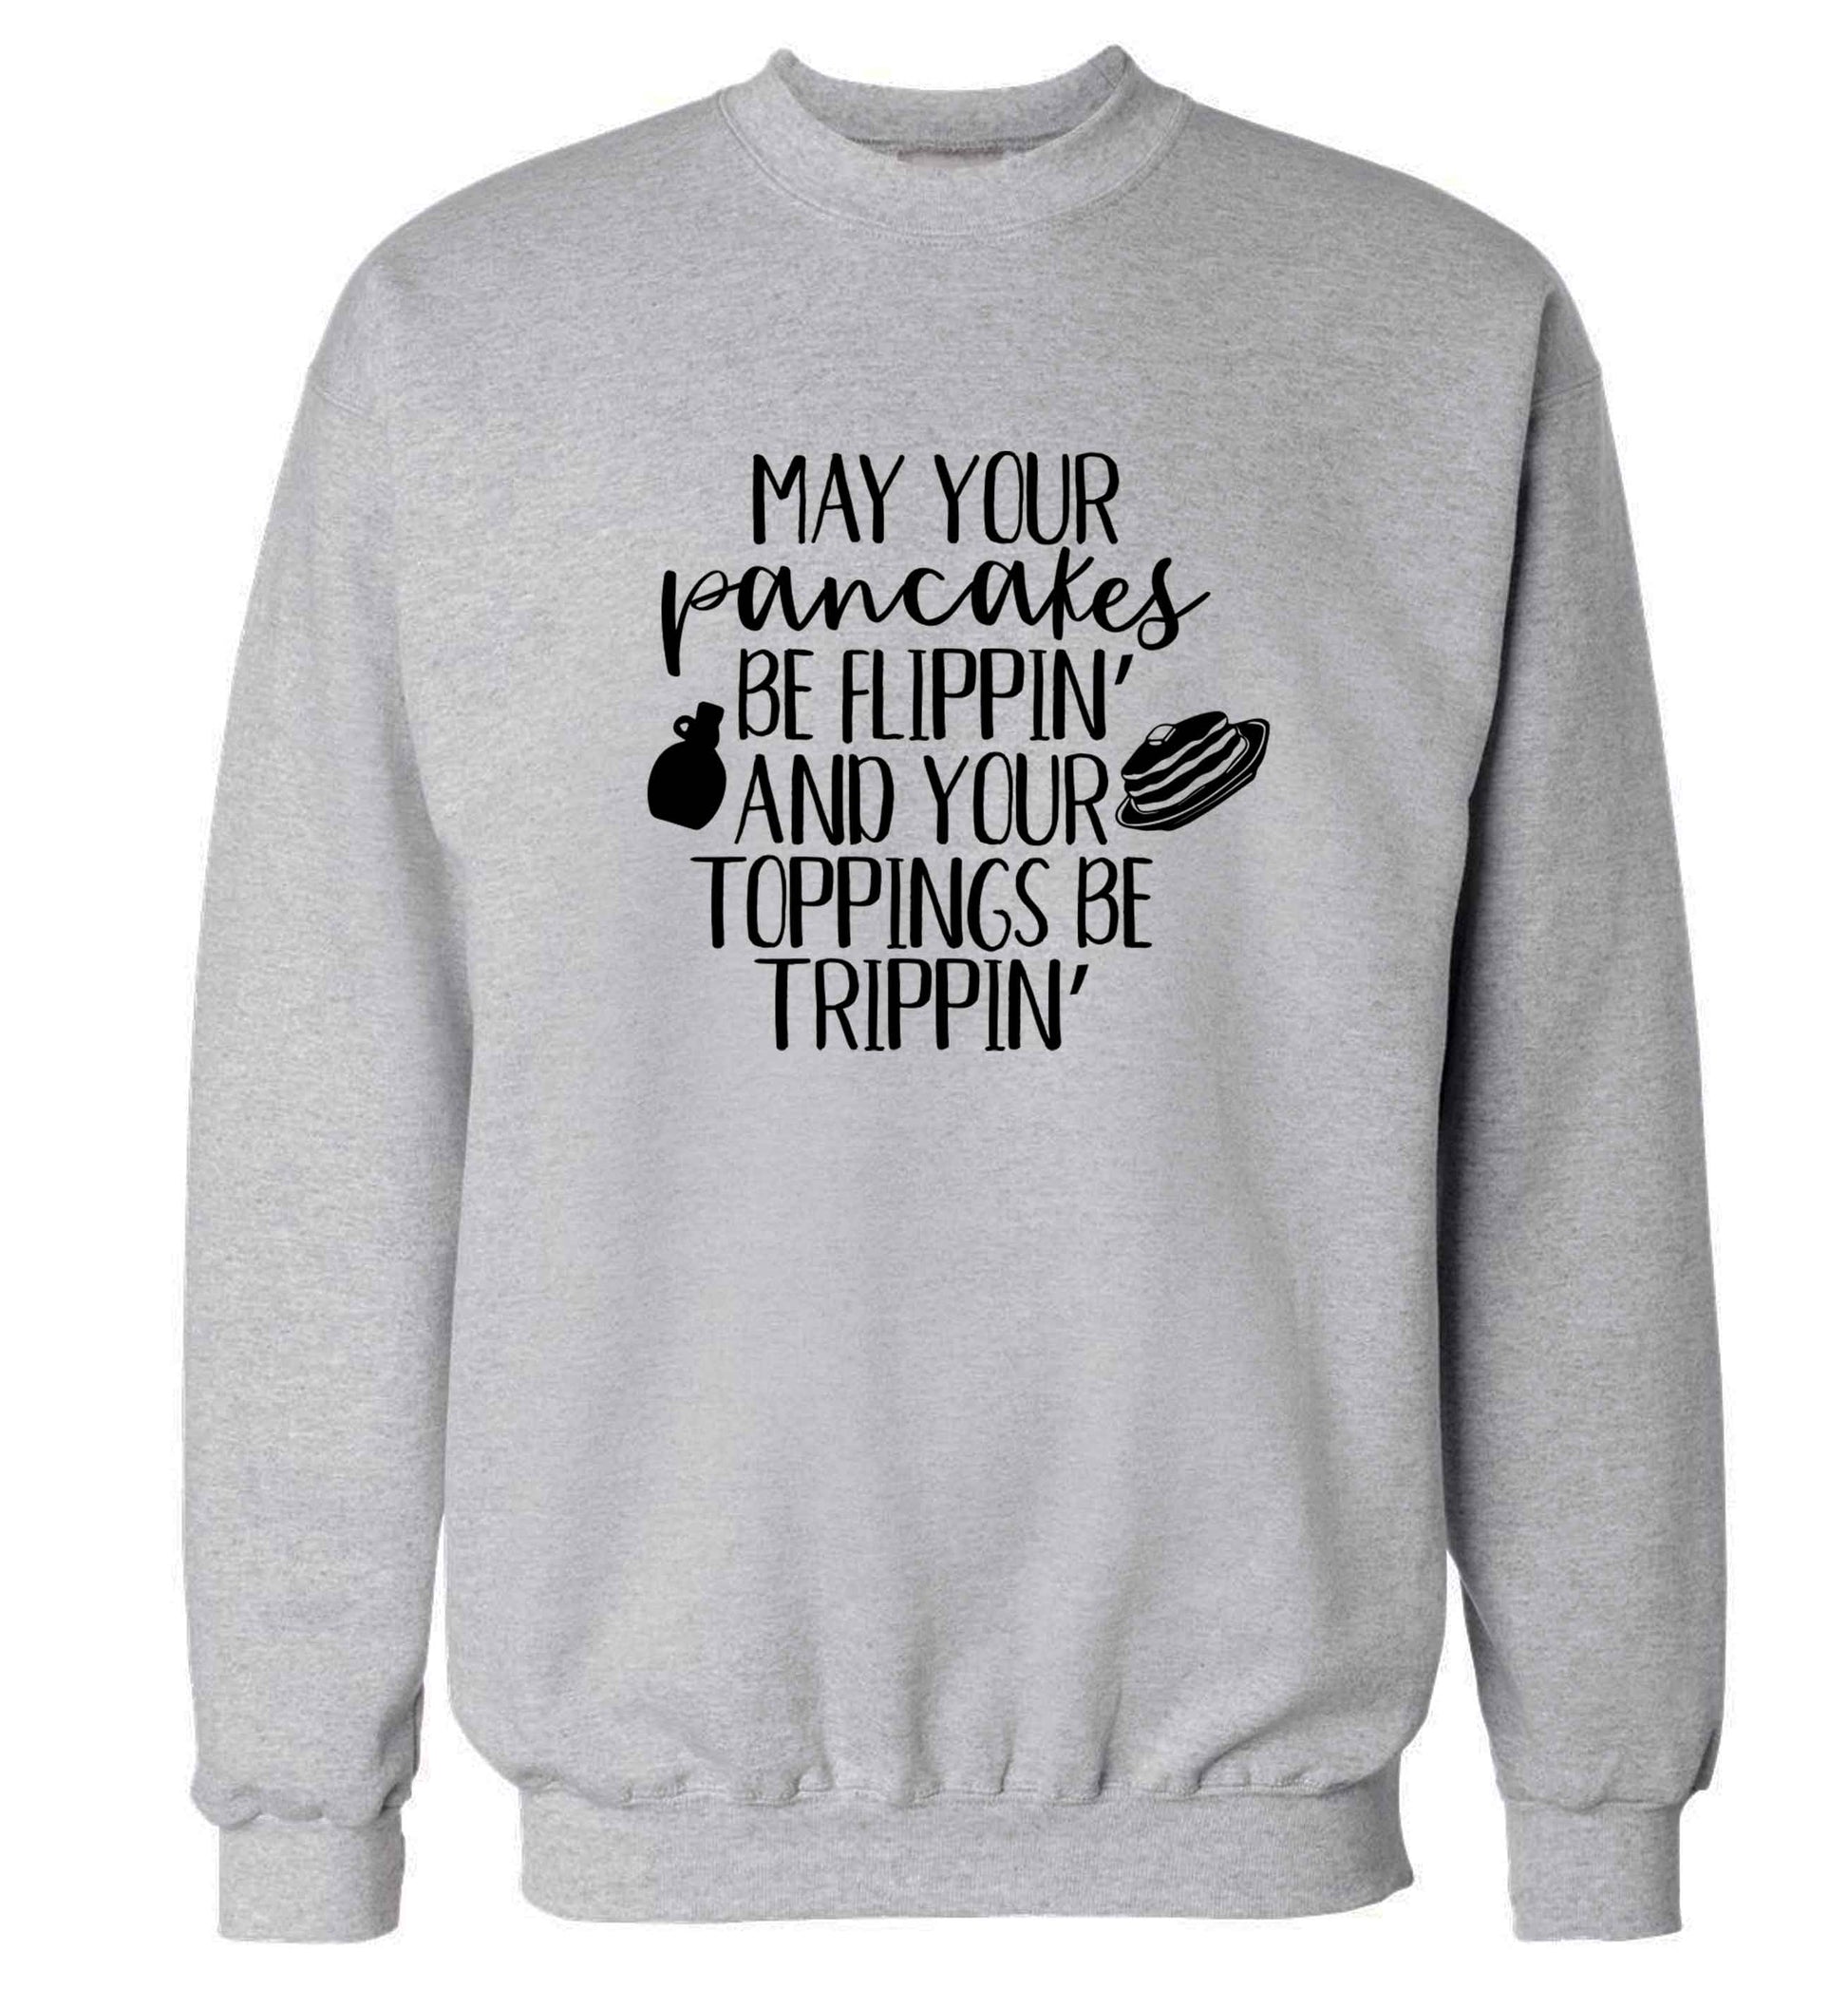 May your pancakes be flippin' and your toppings be trippin' adult's unisex grey sweater 2XL